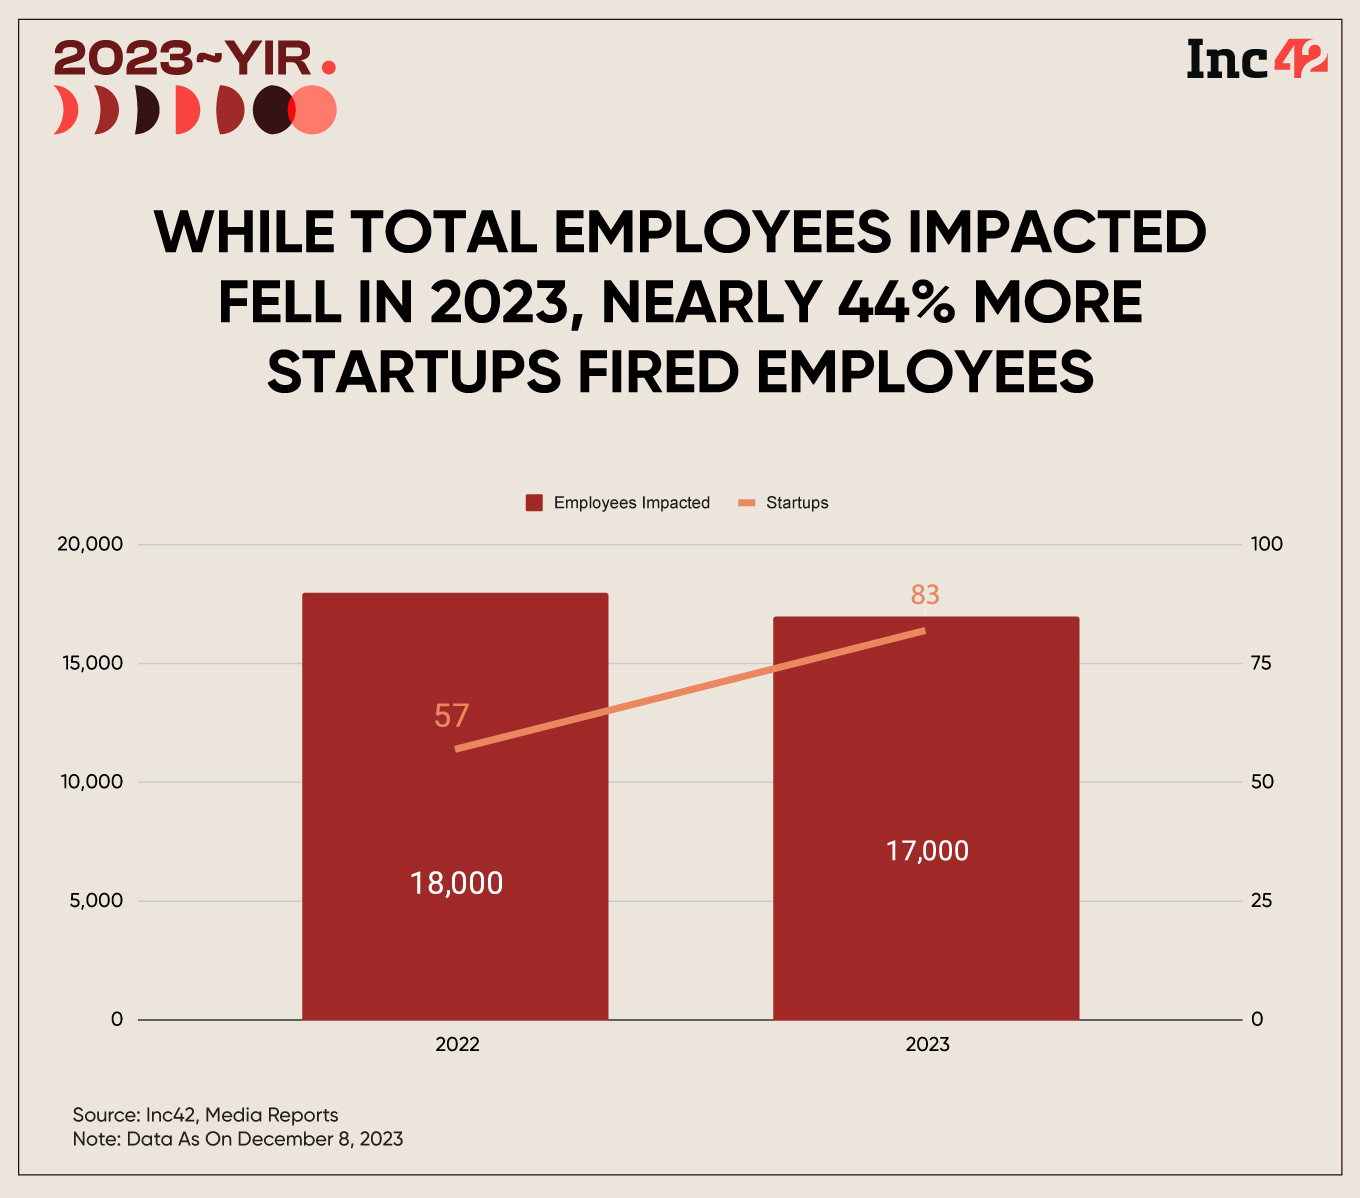 Layoffs Continue Through 2023 As 35K Startup Employees Fired: Is No Respite In Sight?